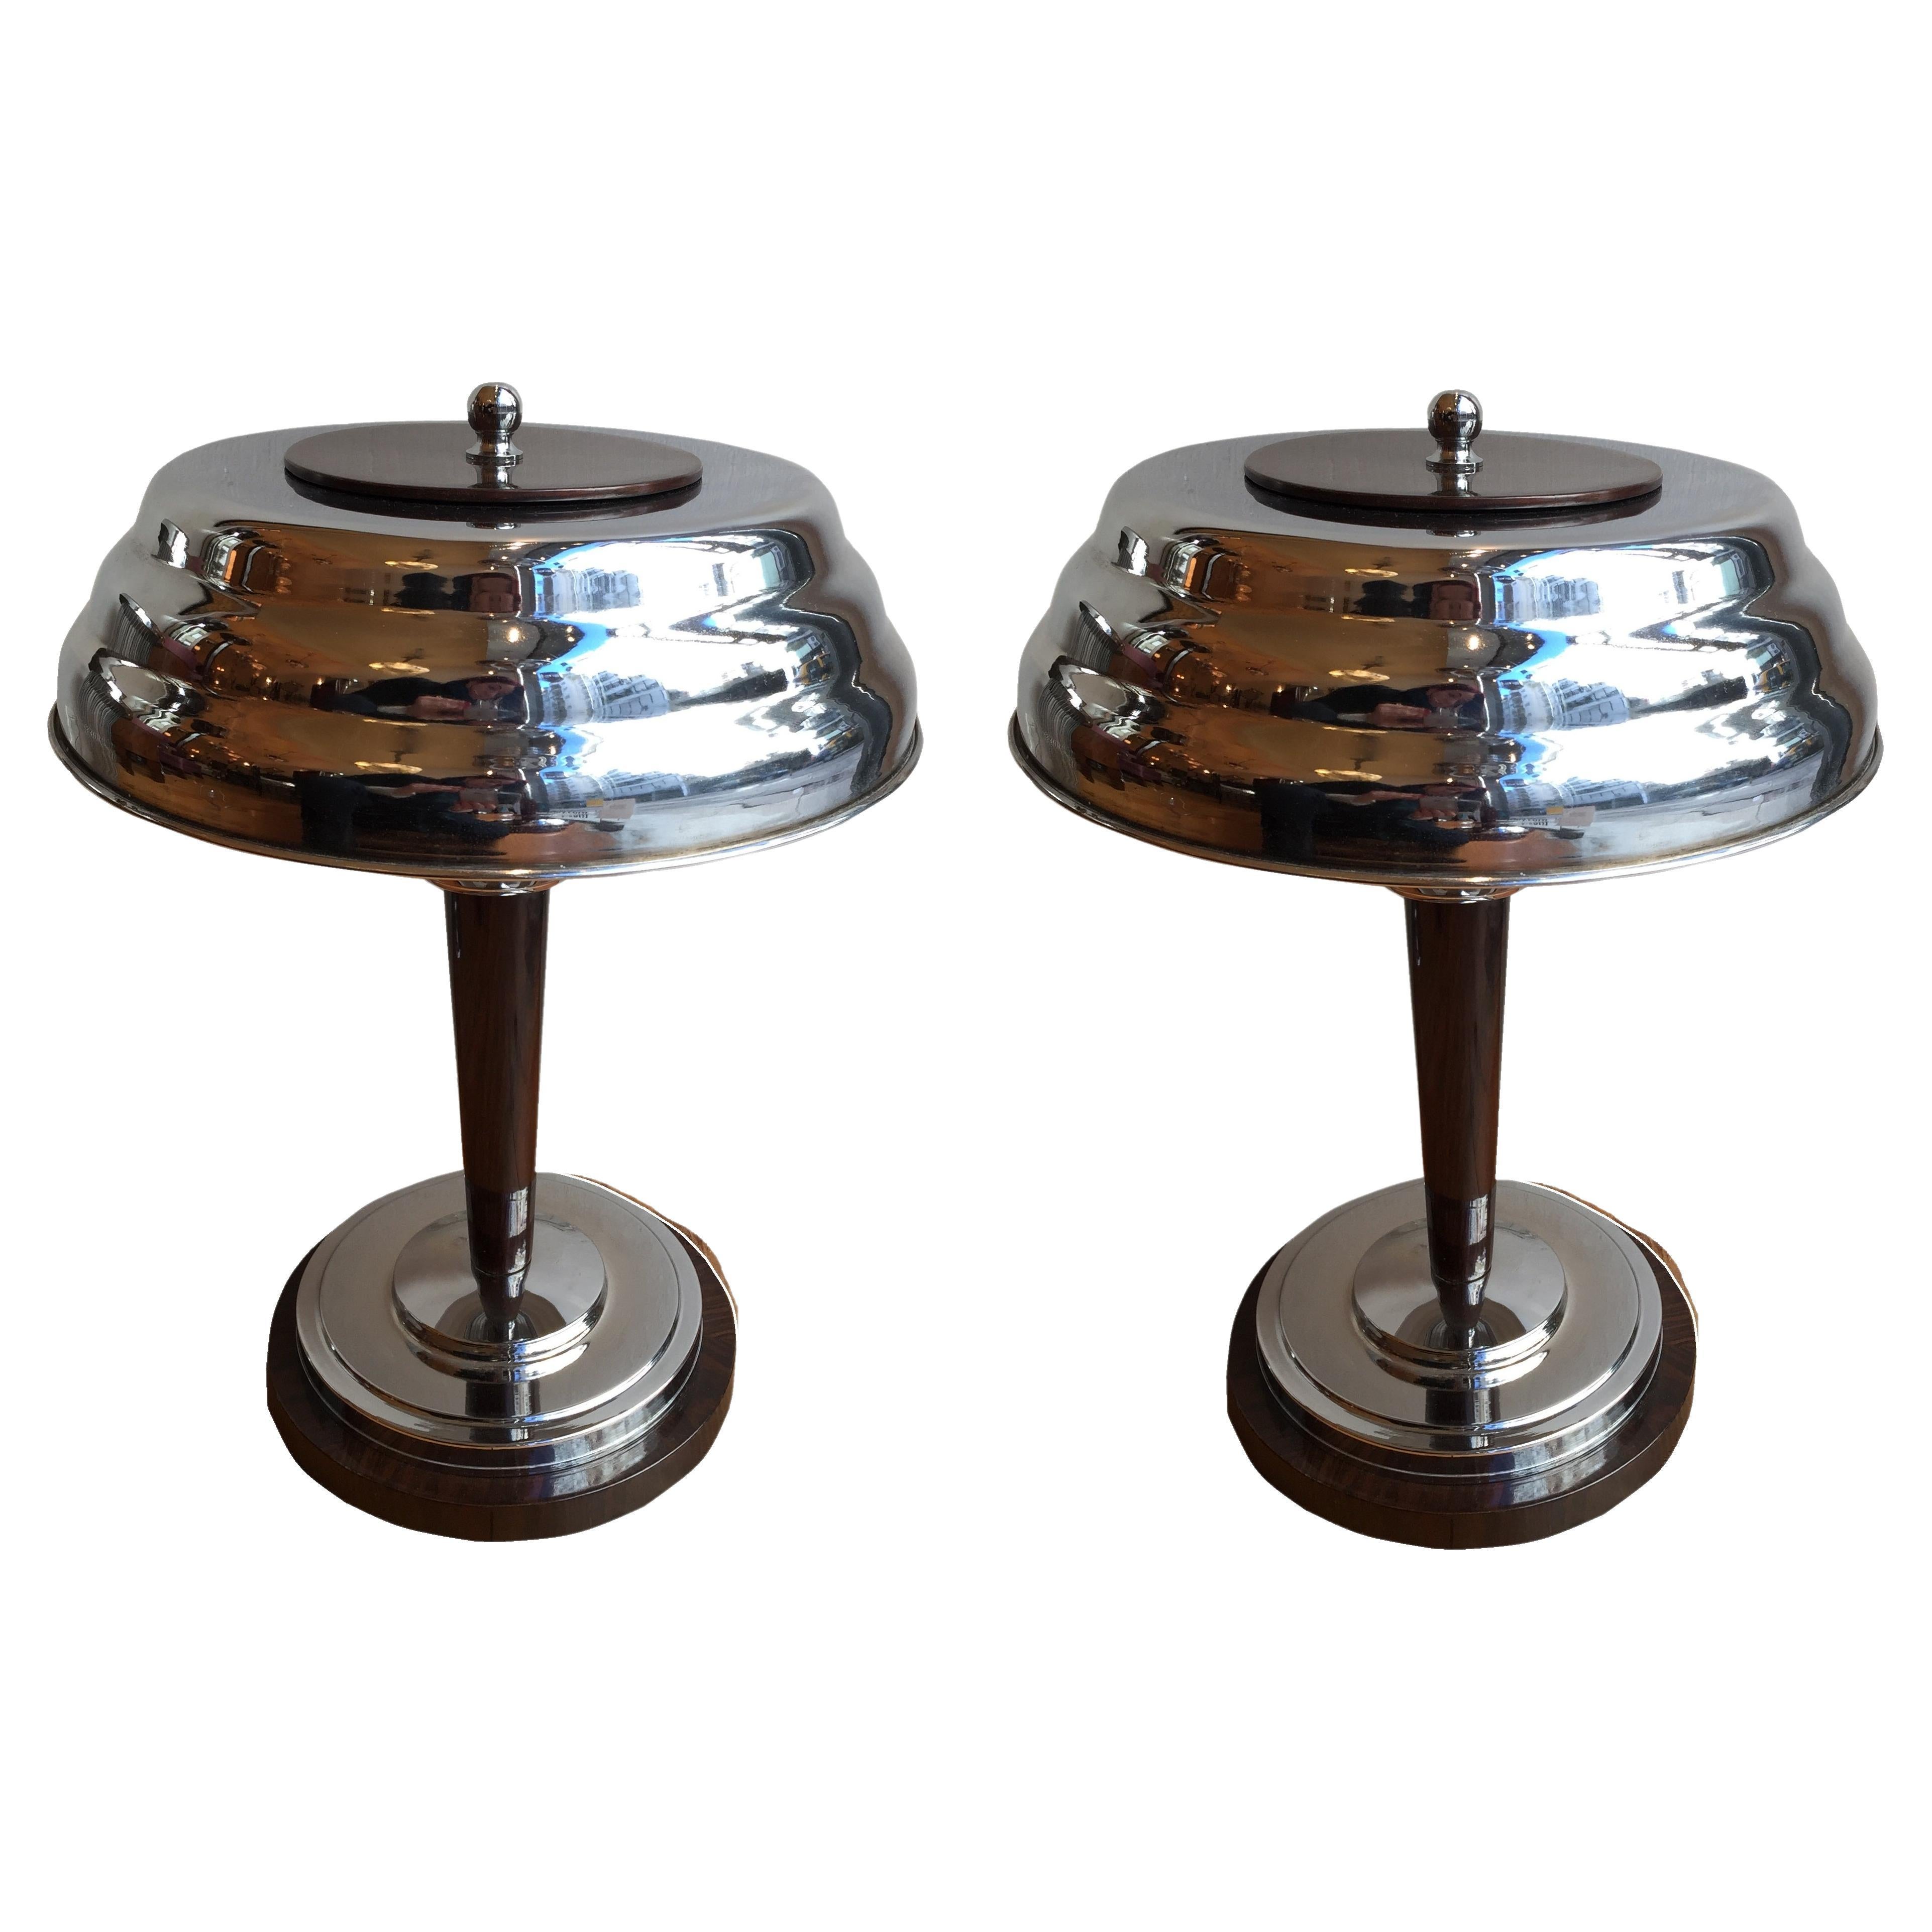 2 Table Lamps, France, 1920, Materials Wood and Chrome, Style Art Deco